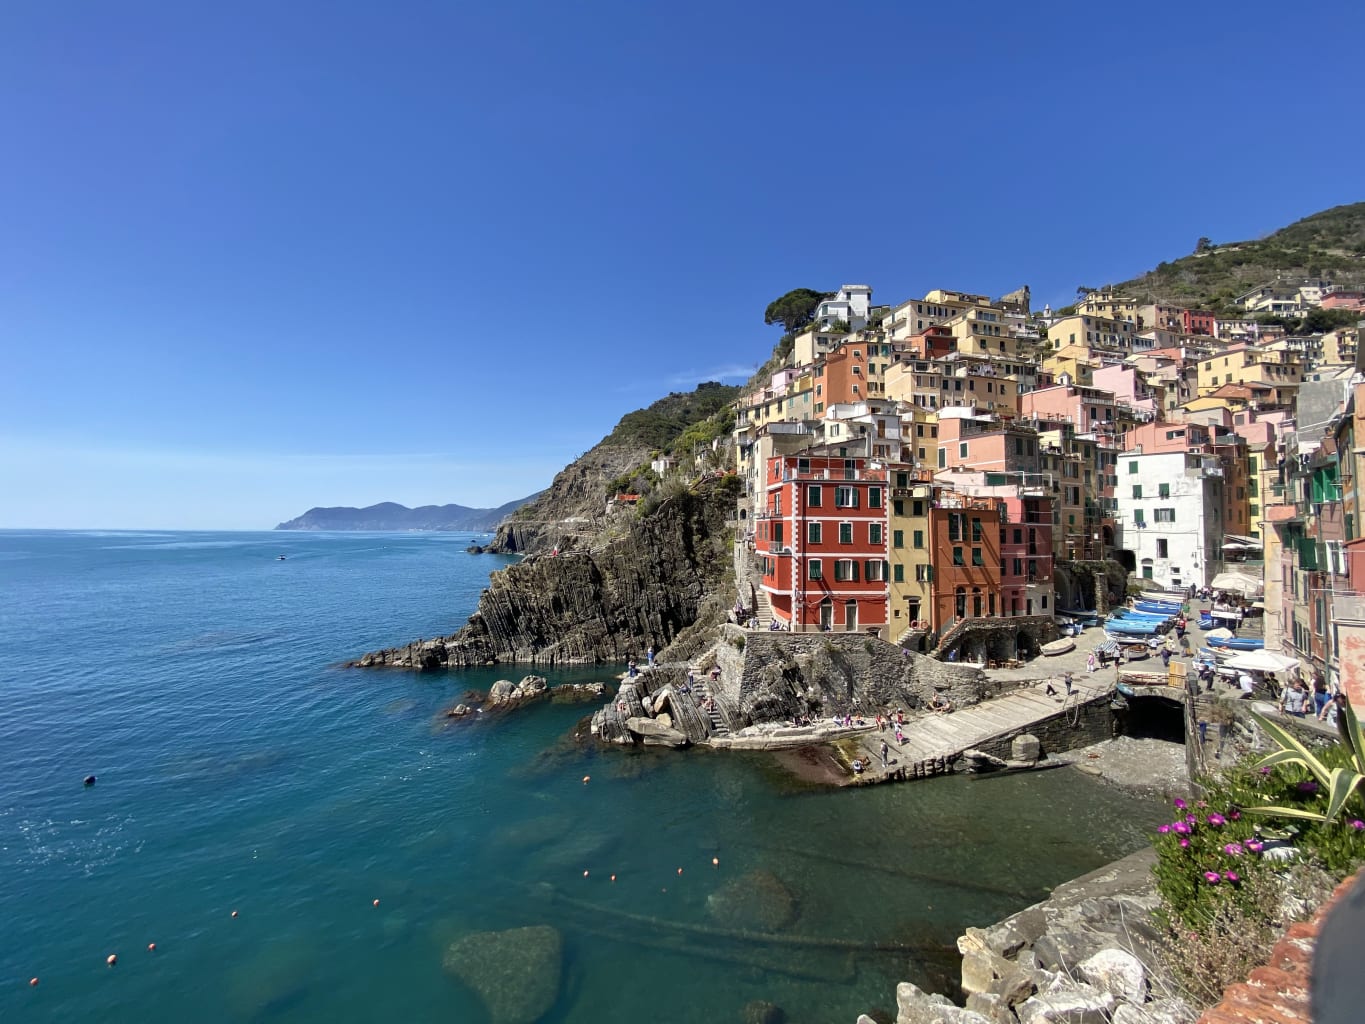 Colorful buildings on a seaside coast in Italy.